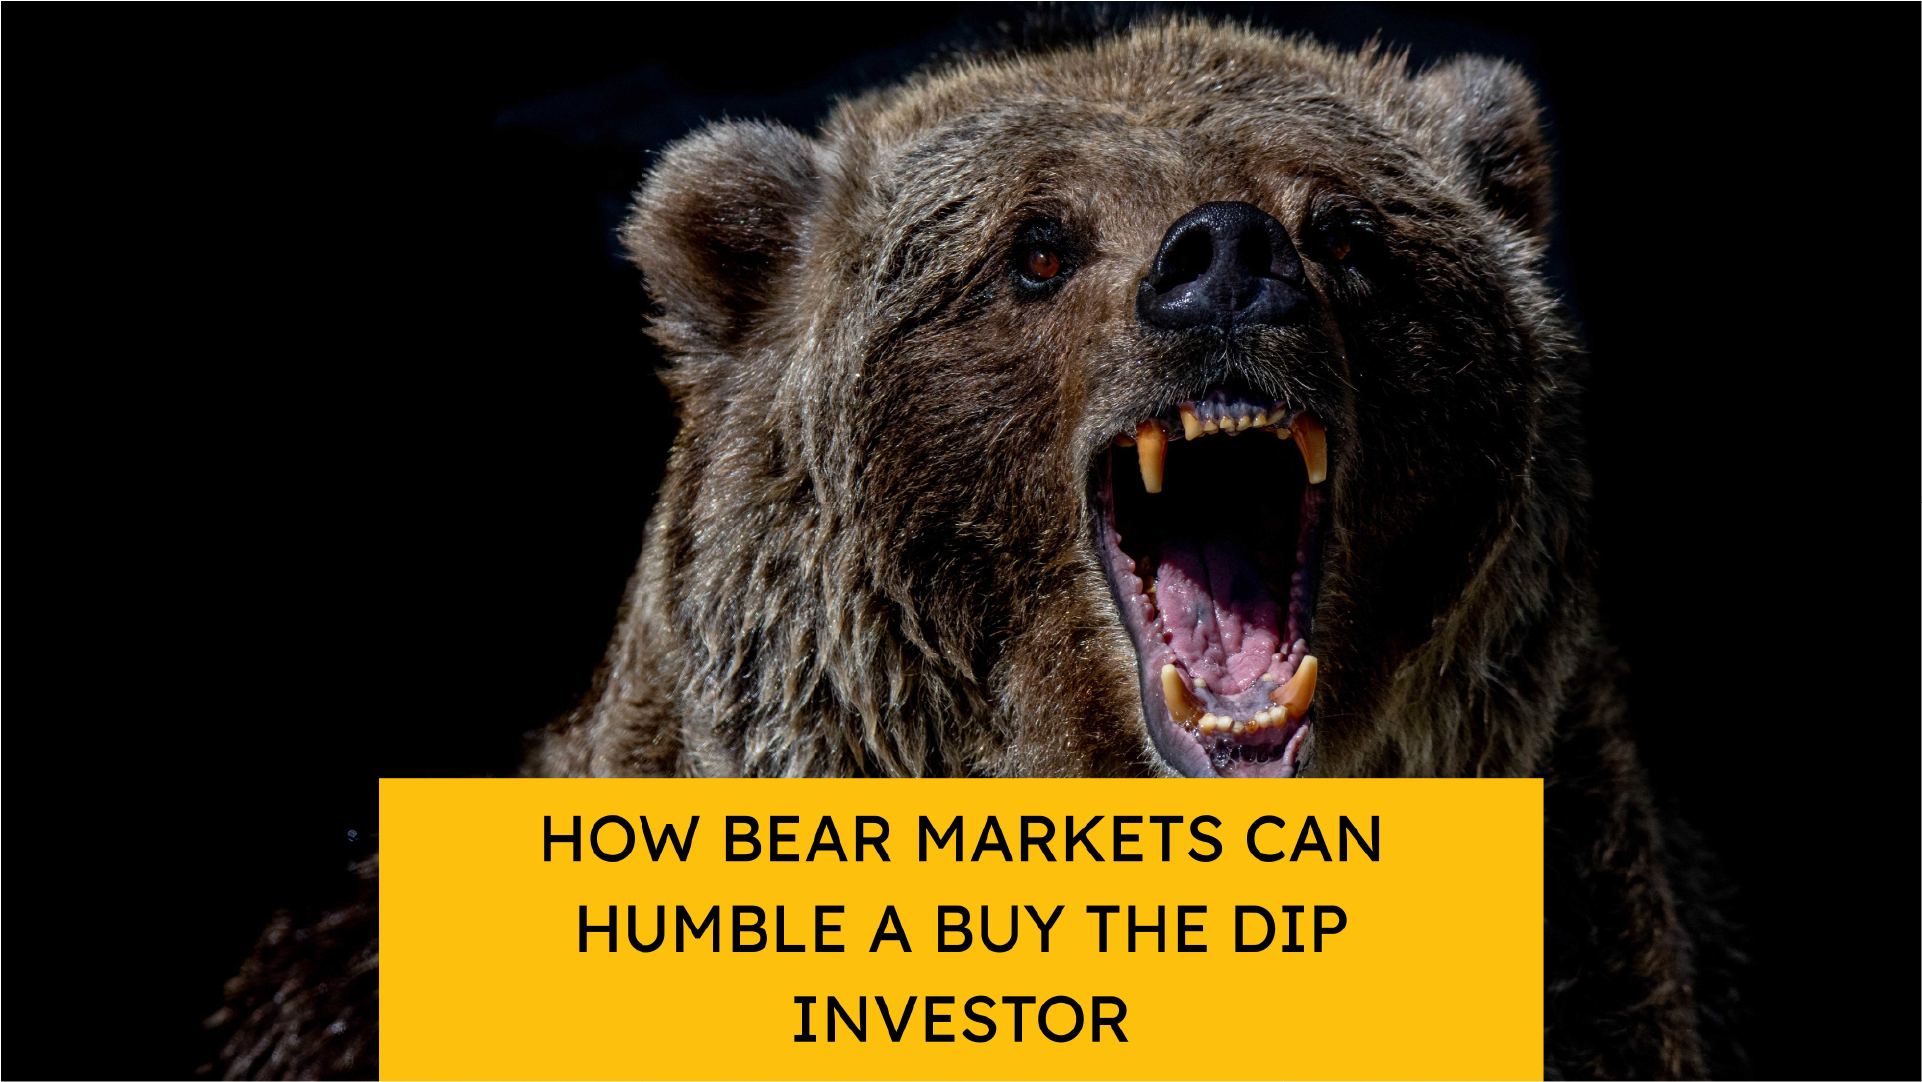 How Bear Markets Can Humble a Buy the Dip Investor